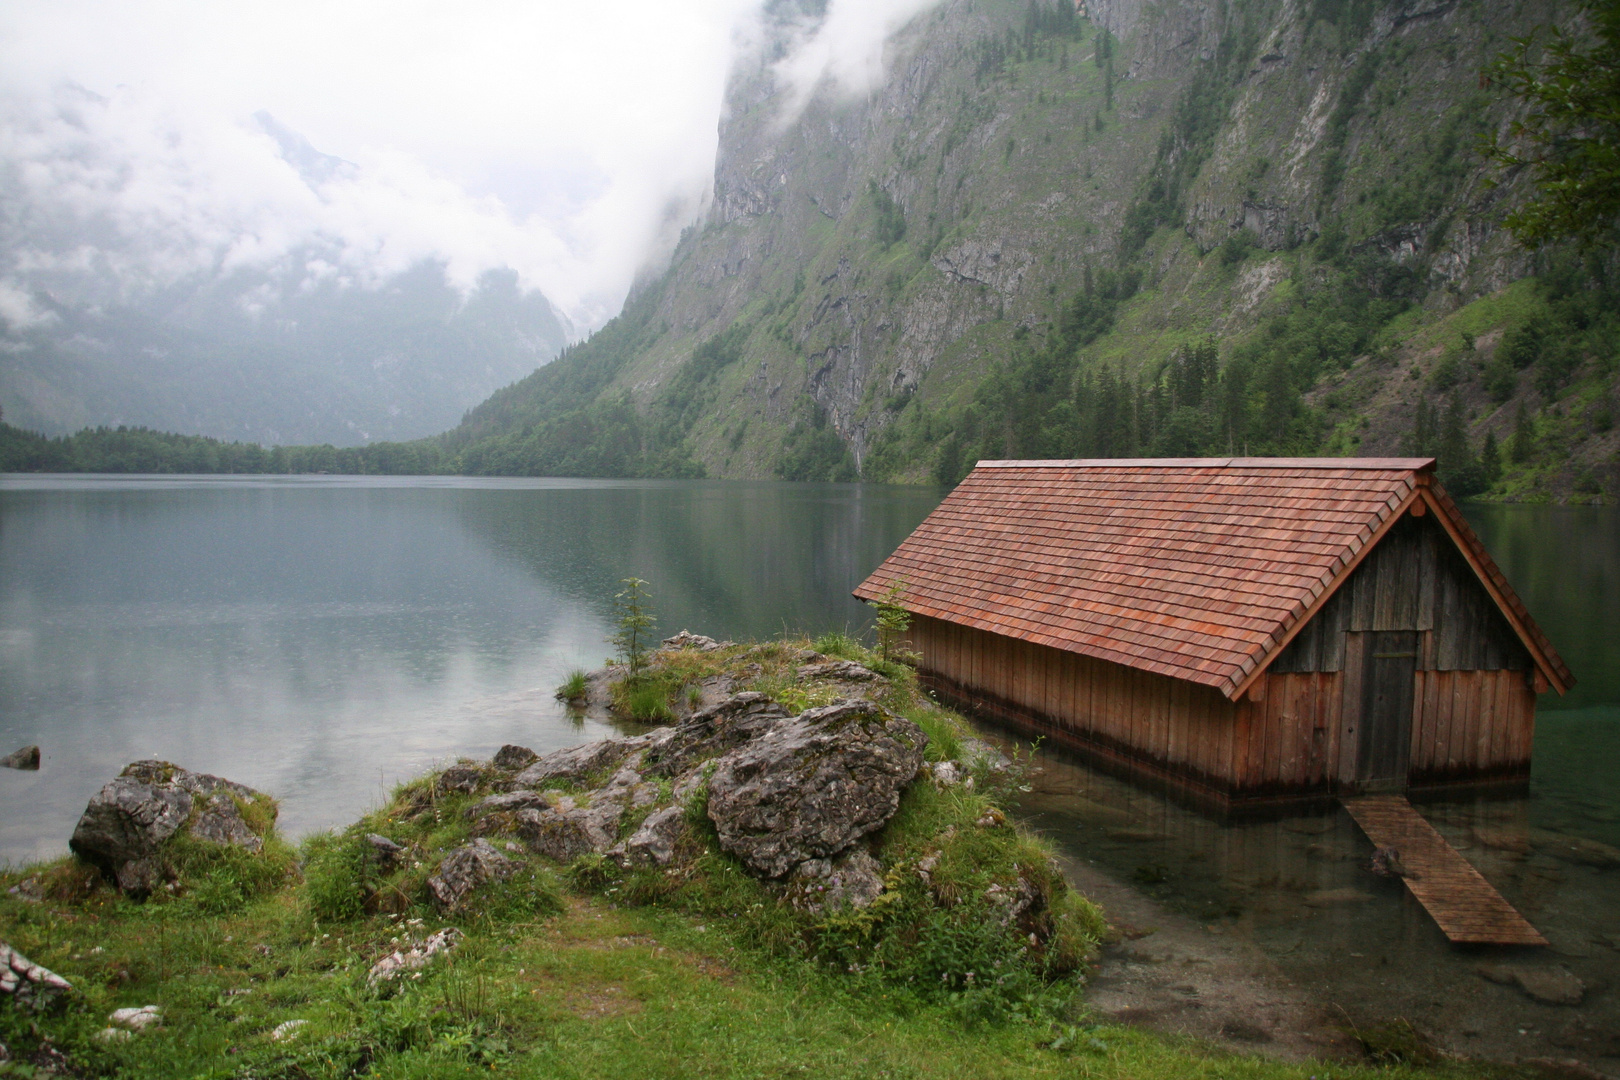 Bootshaus am Obersee